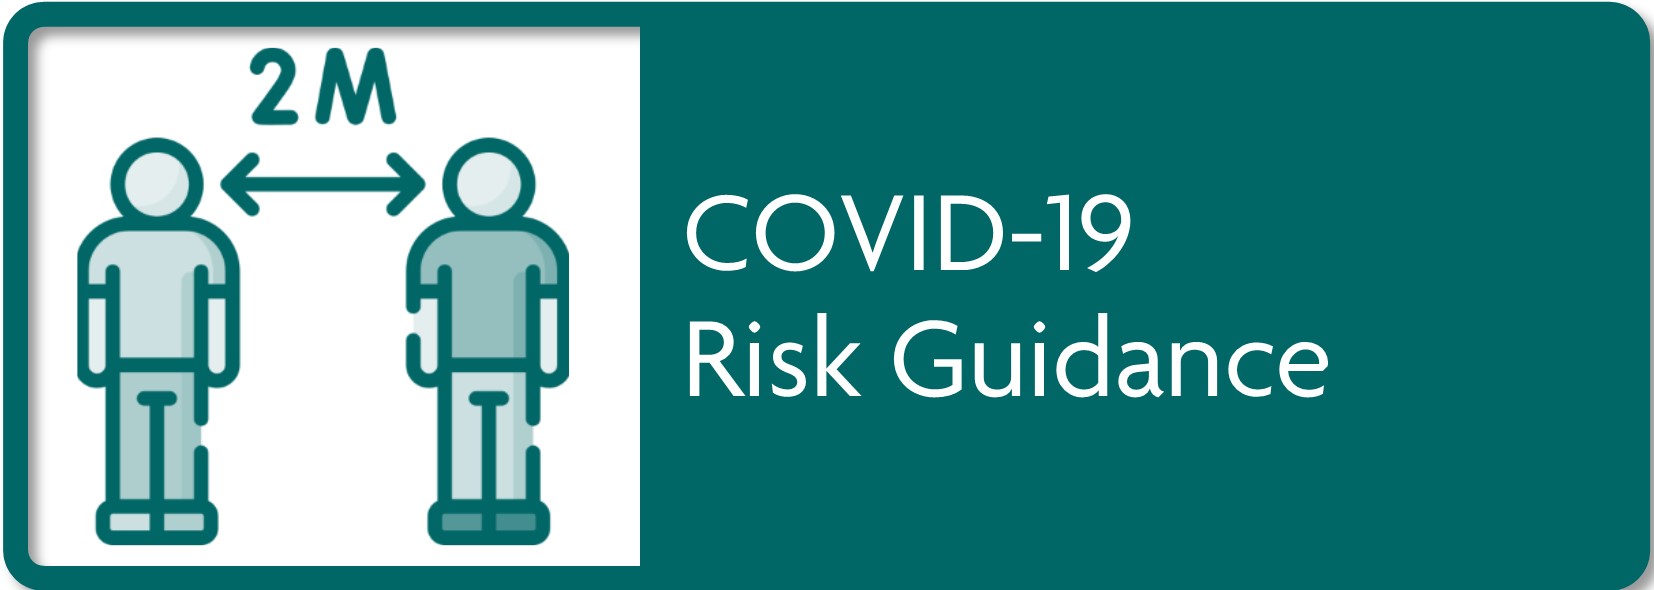 What to Ask Before Meeting Up If You're Immunocompromised or at High Risk  for COVID-19